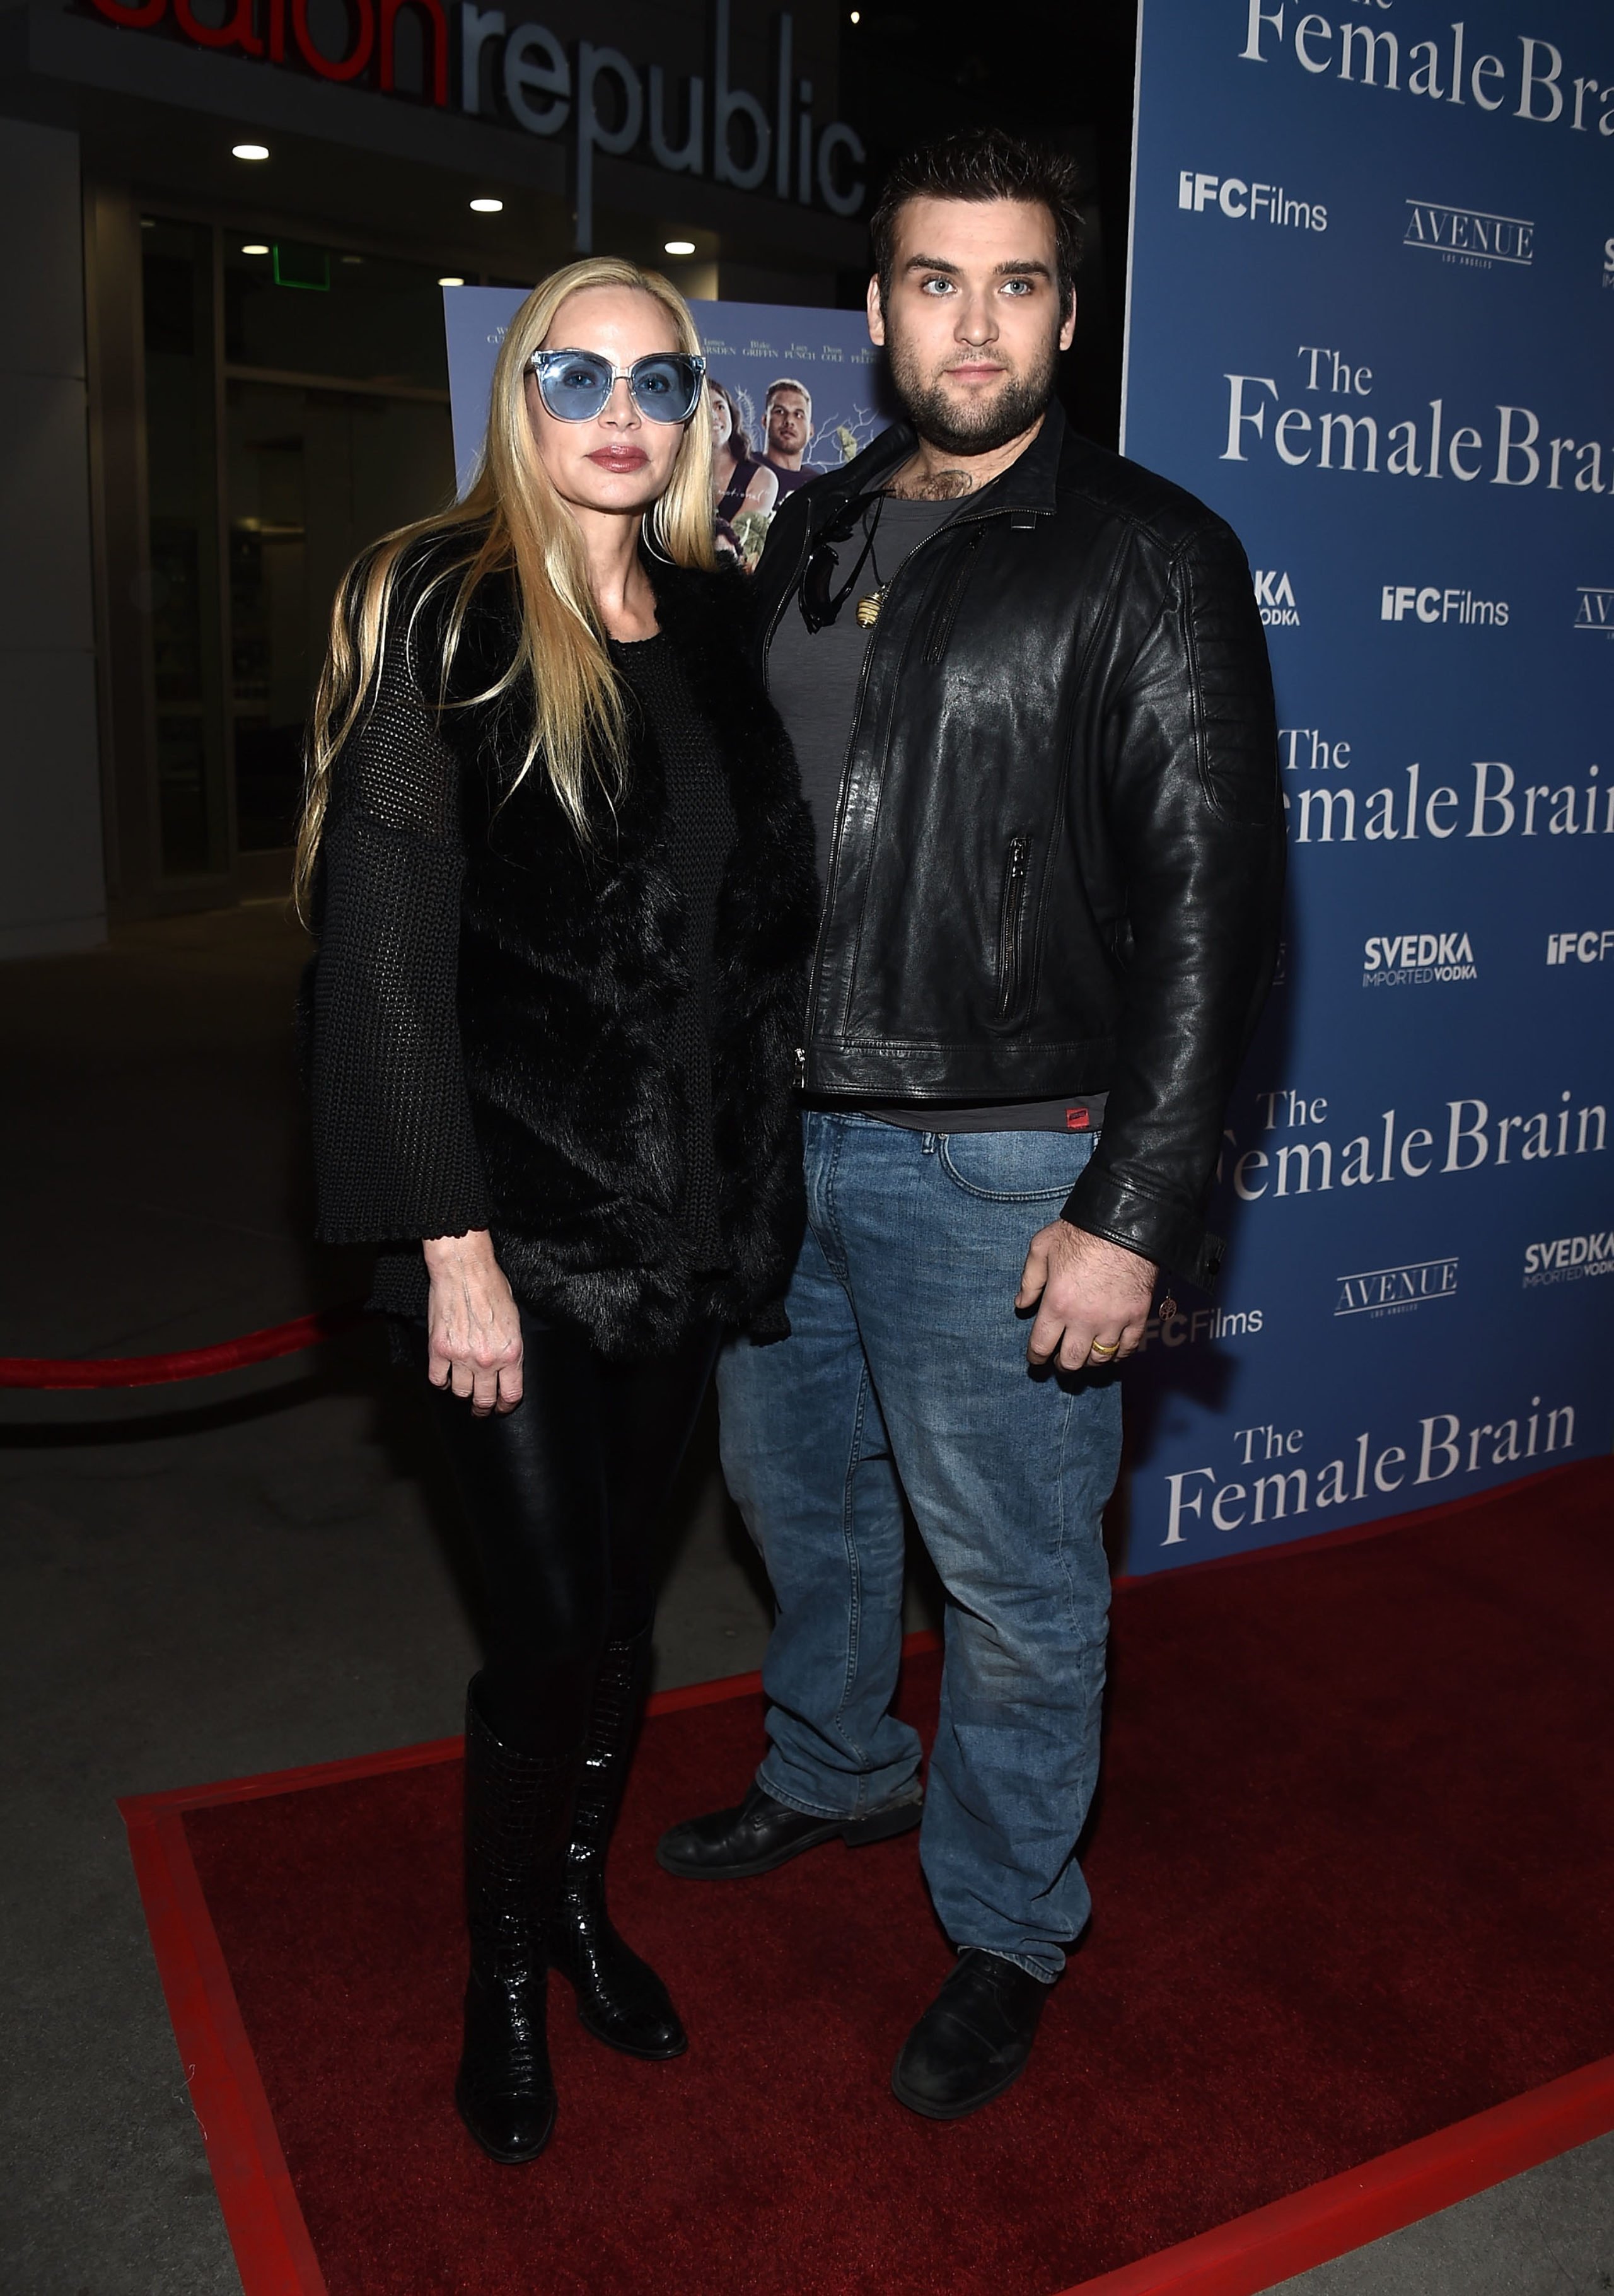 HOLLYWOOD, CA - FEBRUARY 01: Actress Christina Fulton (L) and actor Weston Cage arrive at the premiere of IFC Films' "The Female Brain" at the ArcLight Hollywood on February 1, 2018 in Hollywood, California. (Photo by Amanda Edwards/WireImage) Getty Images